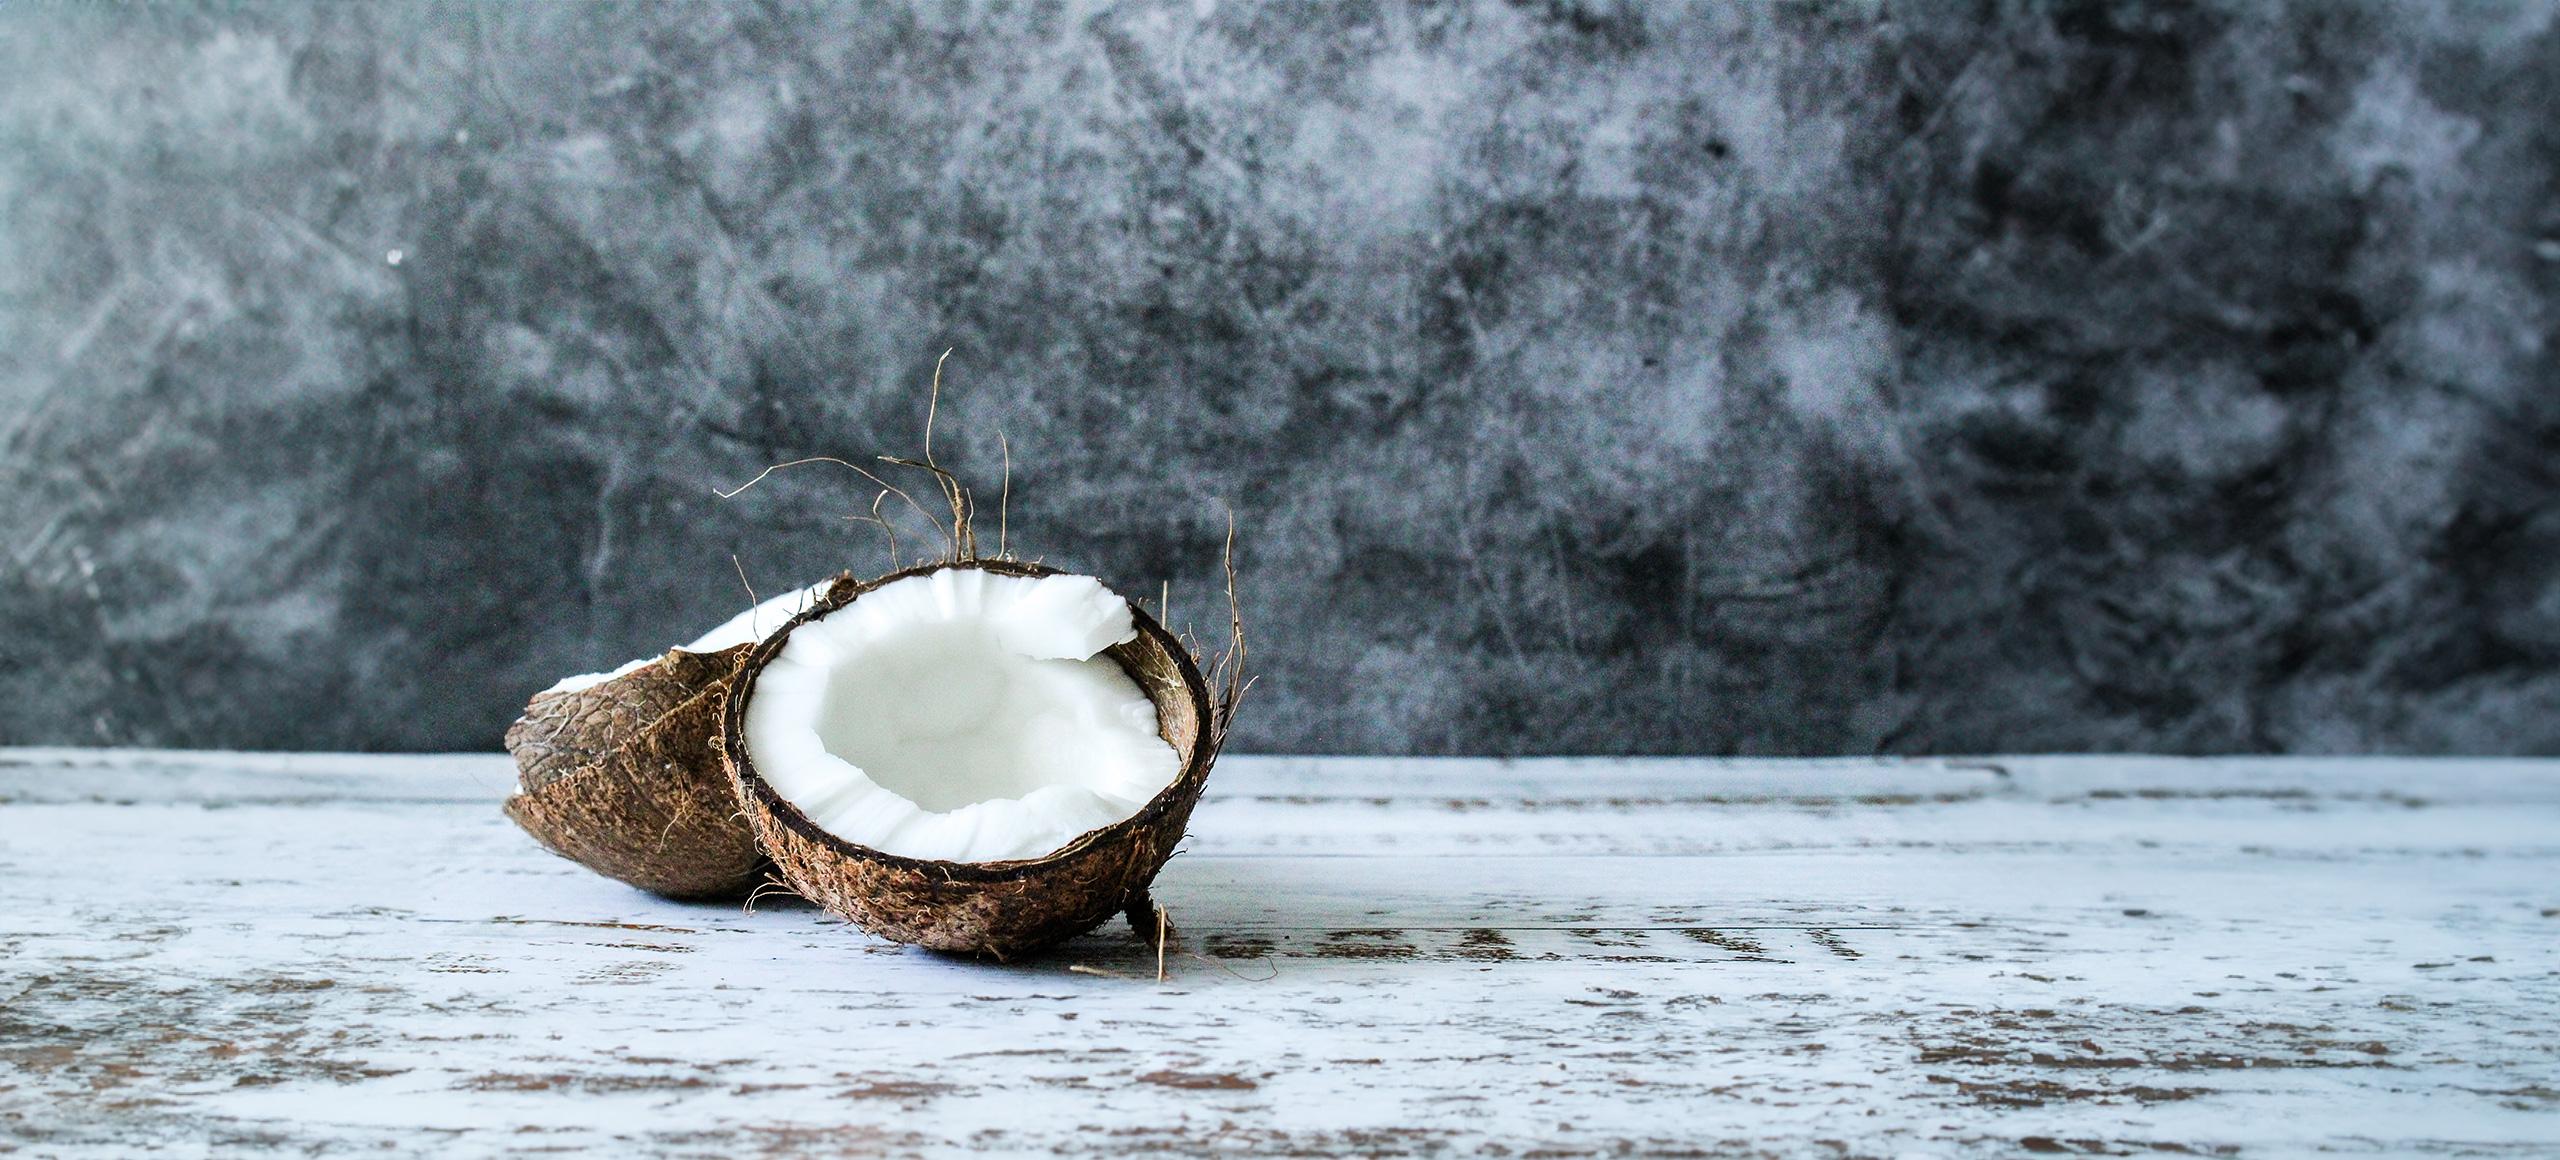 Coconut on a table